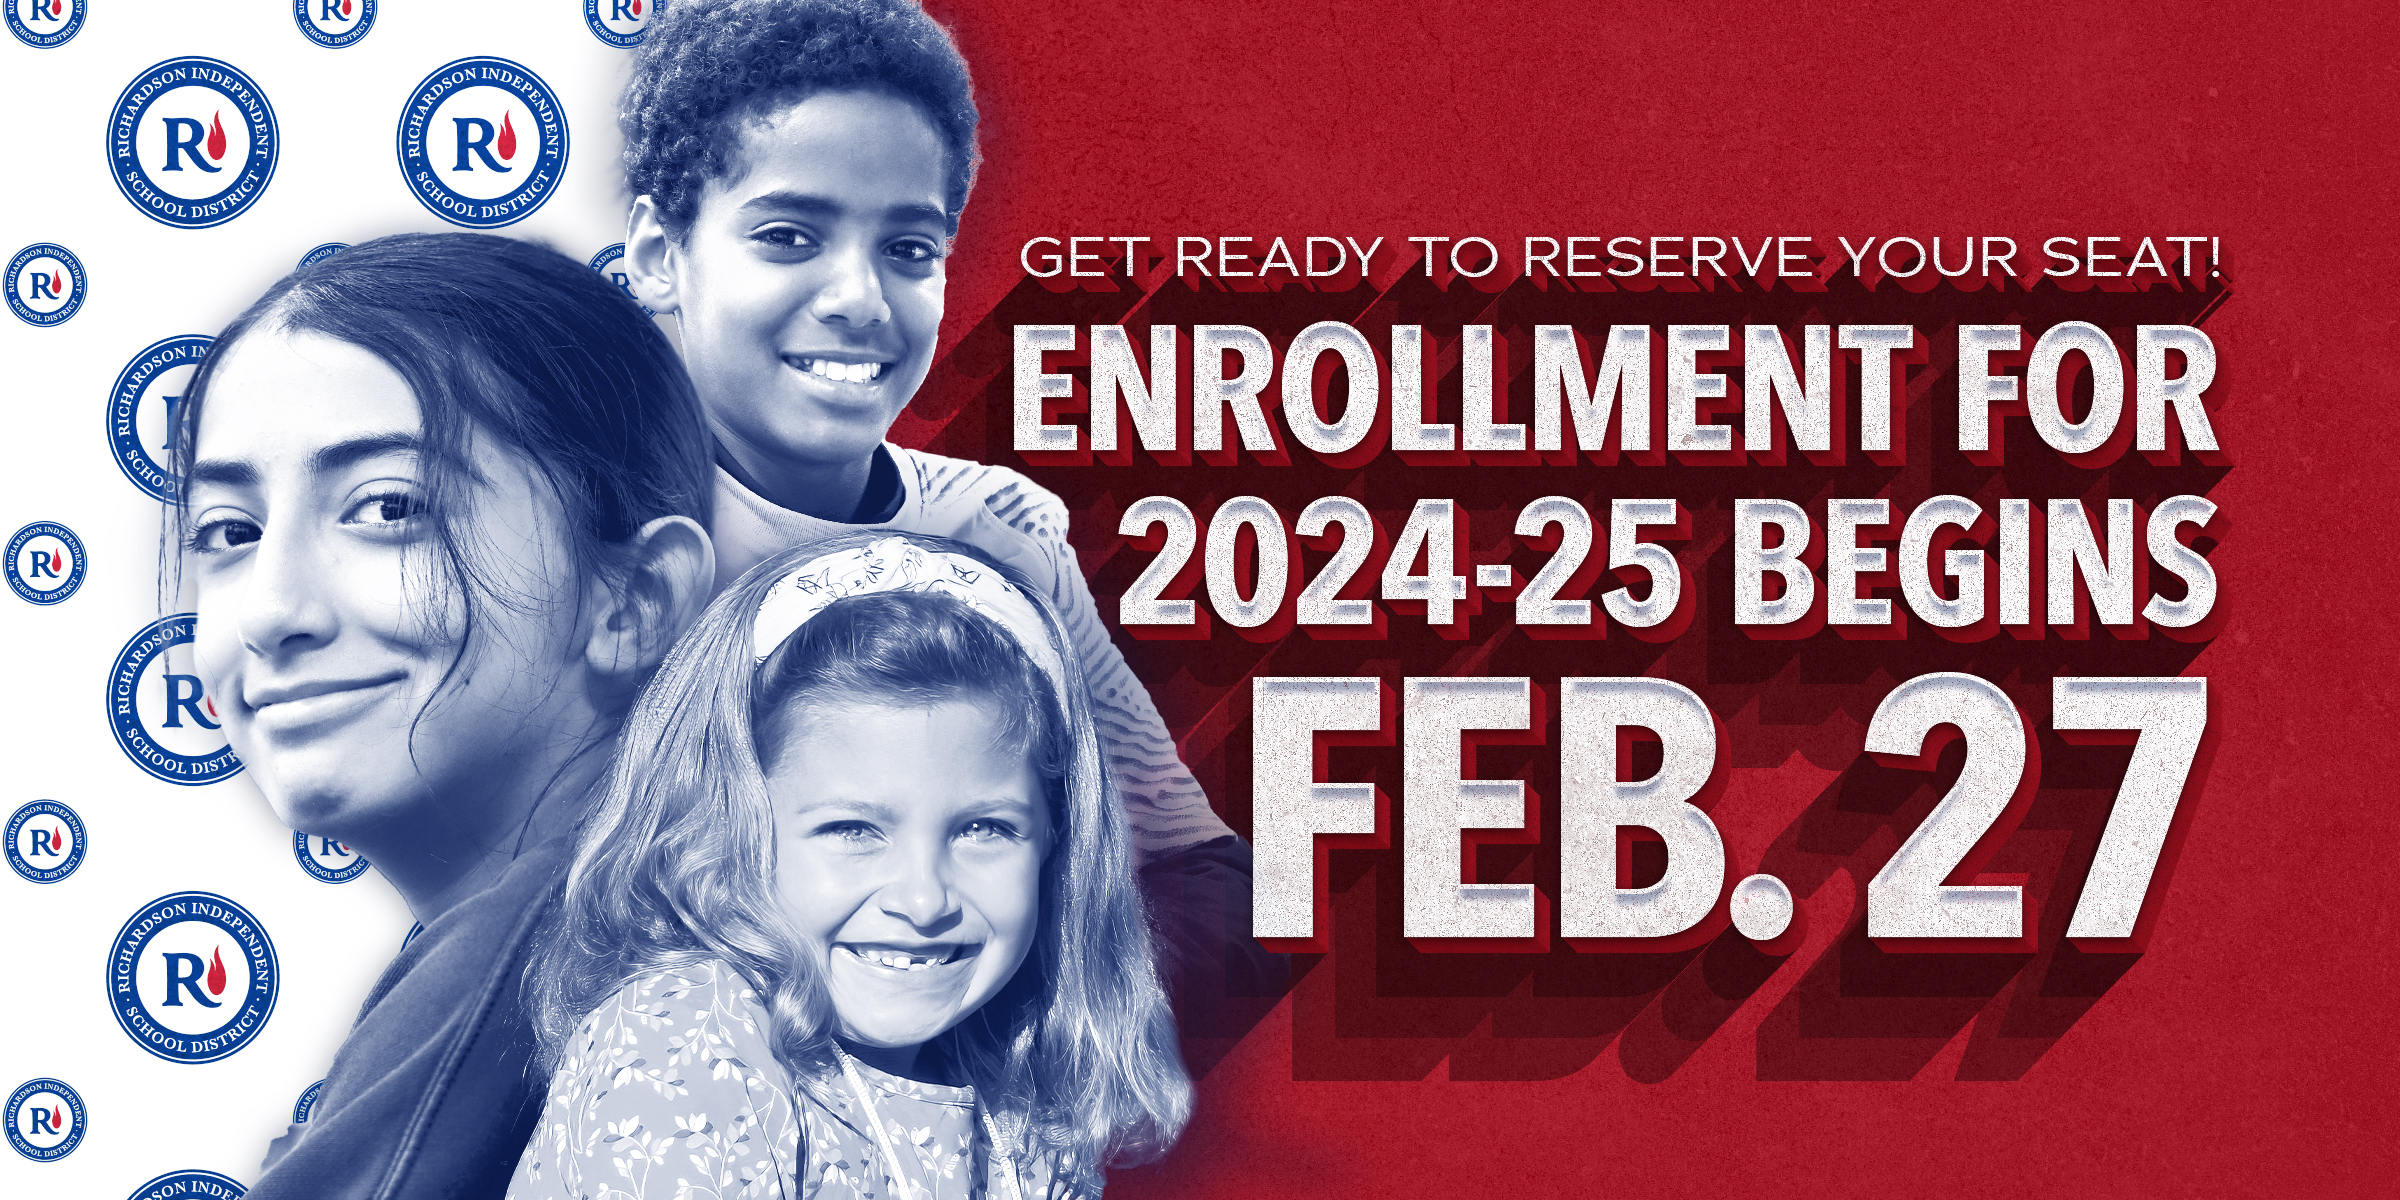 Get ready to reserve your seat. Enrollment for 24-25 begins Feb. 27